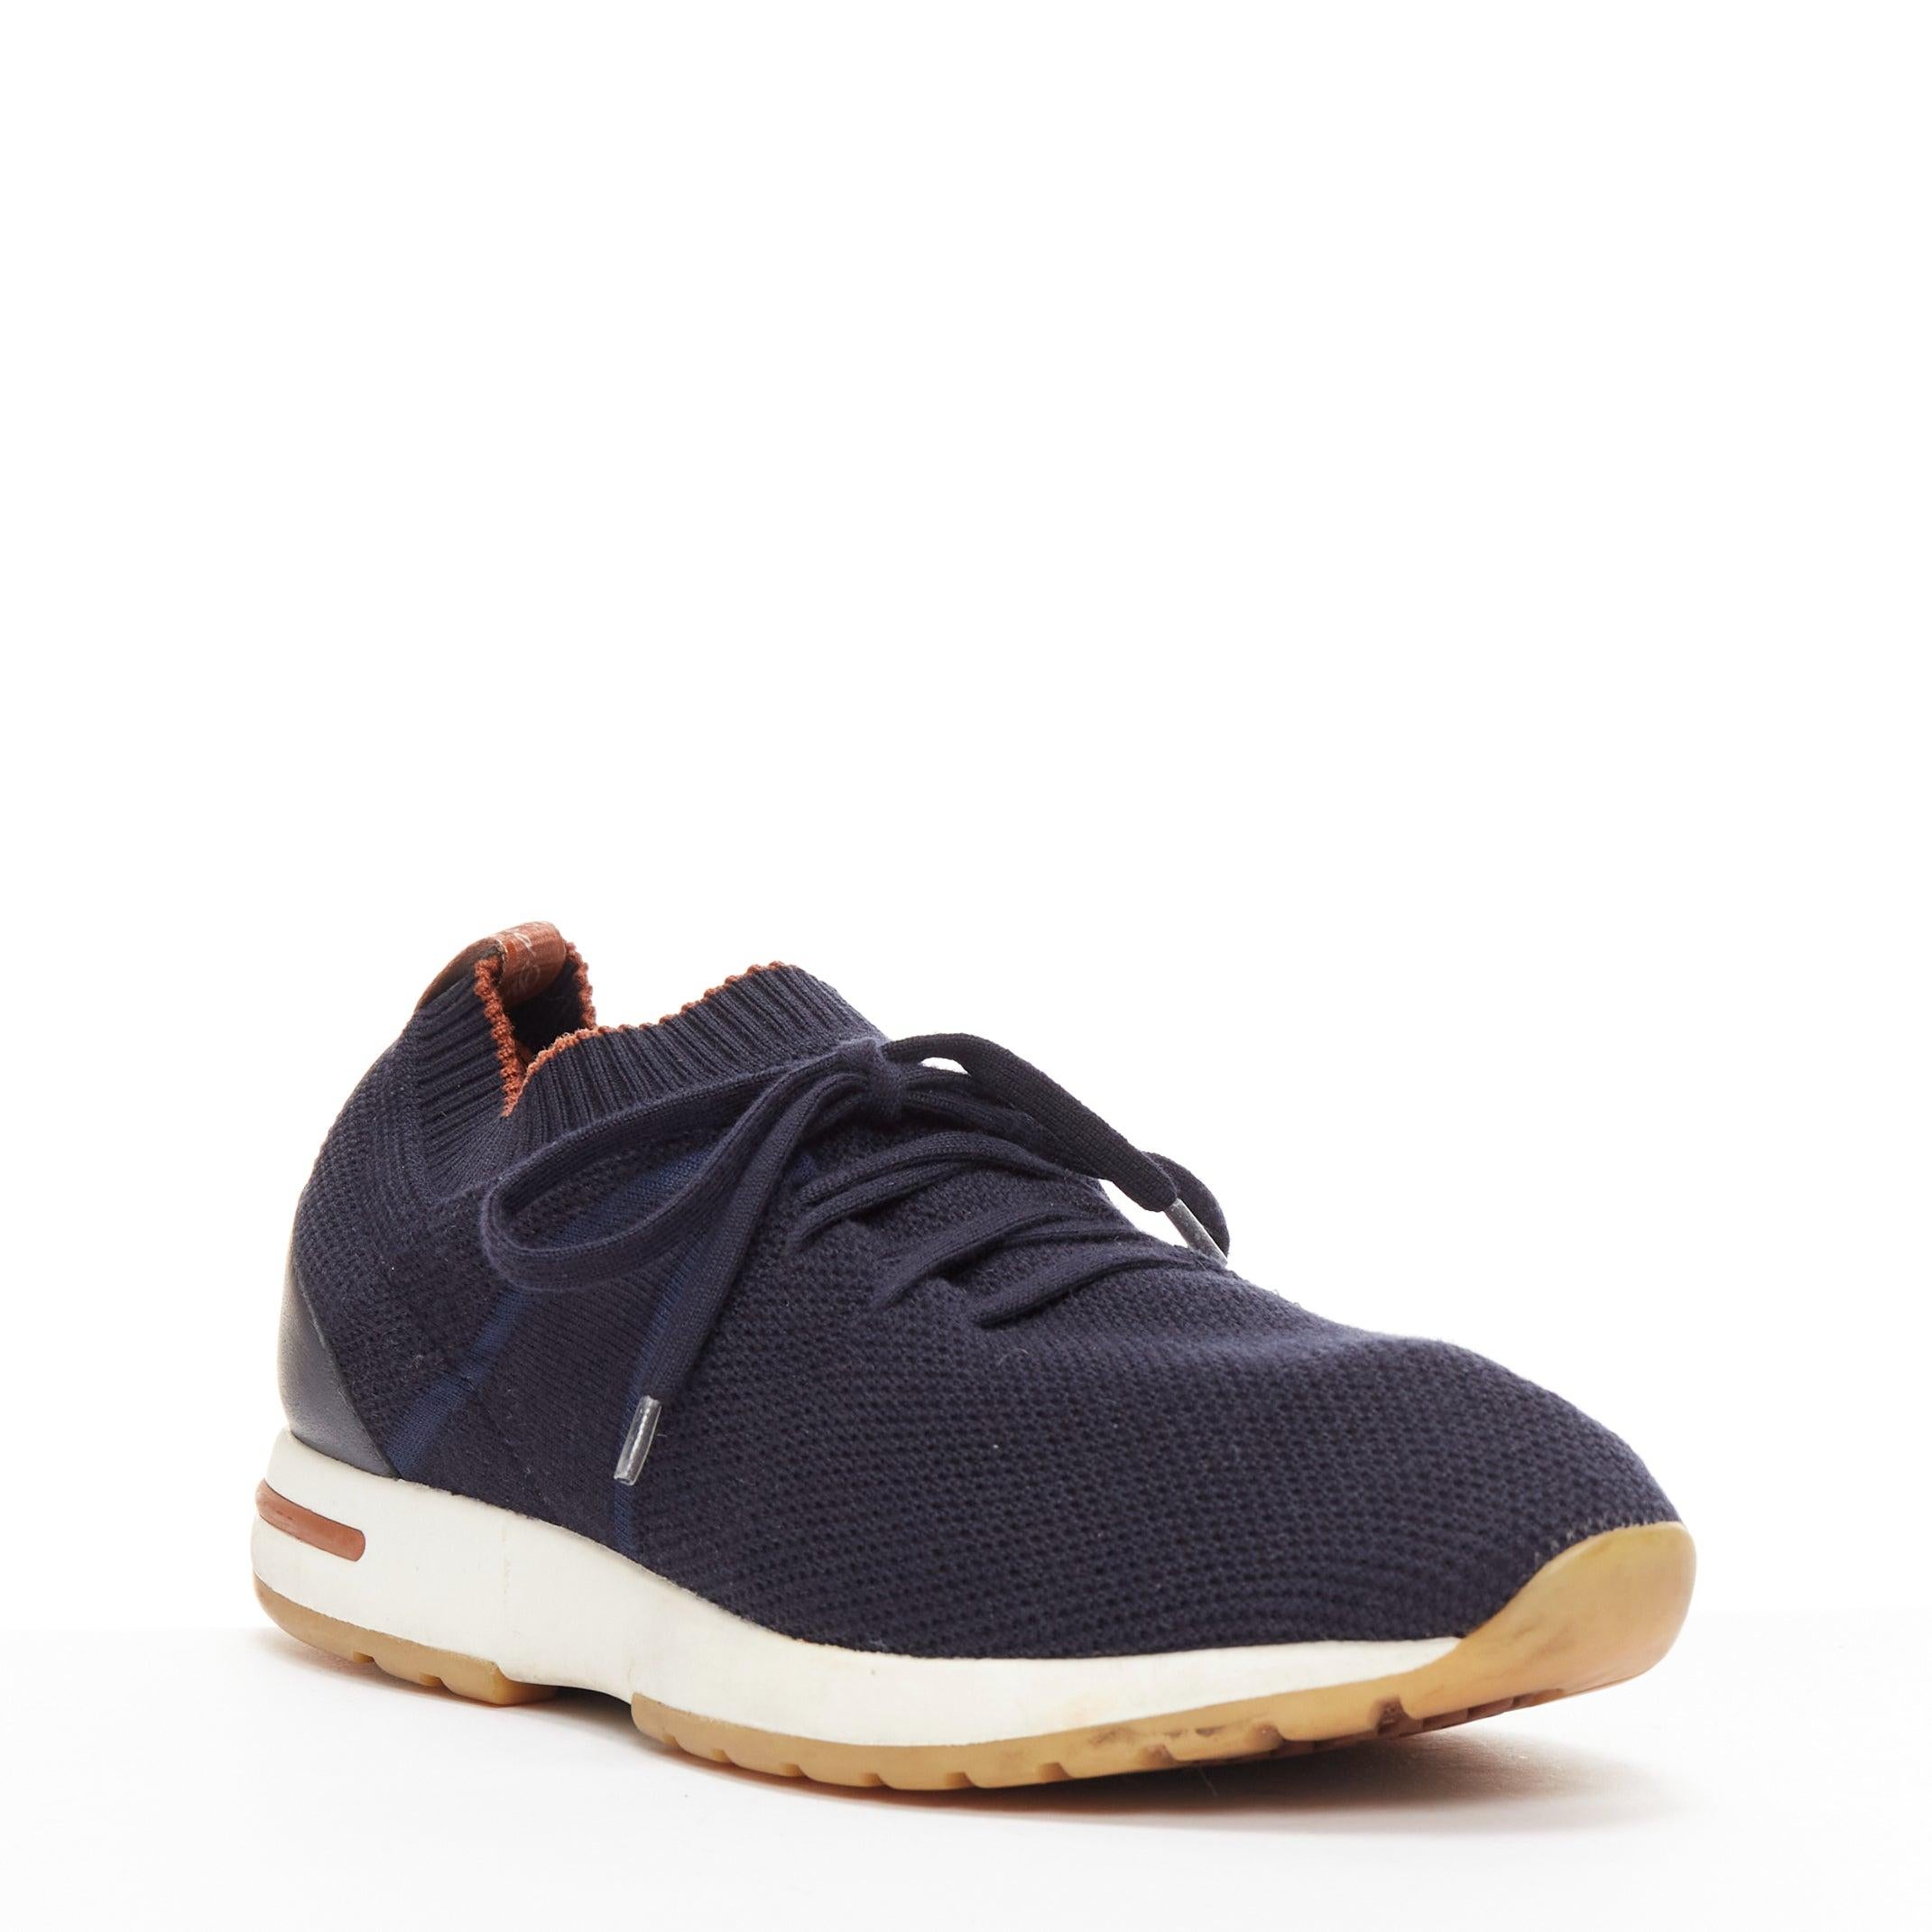 LORO PIANA 30 Flexy Walk navy knitted wish silk leather trim sneakers EU41
Reference: YIKK/A00037
Brand: Loro Piana
Material: Fabric
Color: Navy, Brown
Pattern: Solid
Closure: Lace Up
Lining: Brown Leather
Extra Details: Loro Piana's sneakers are